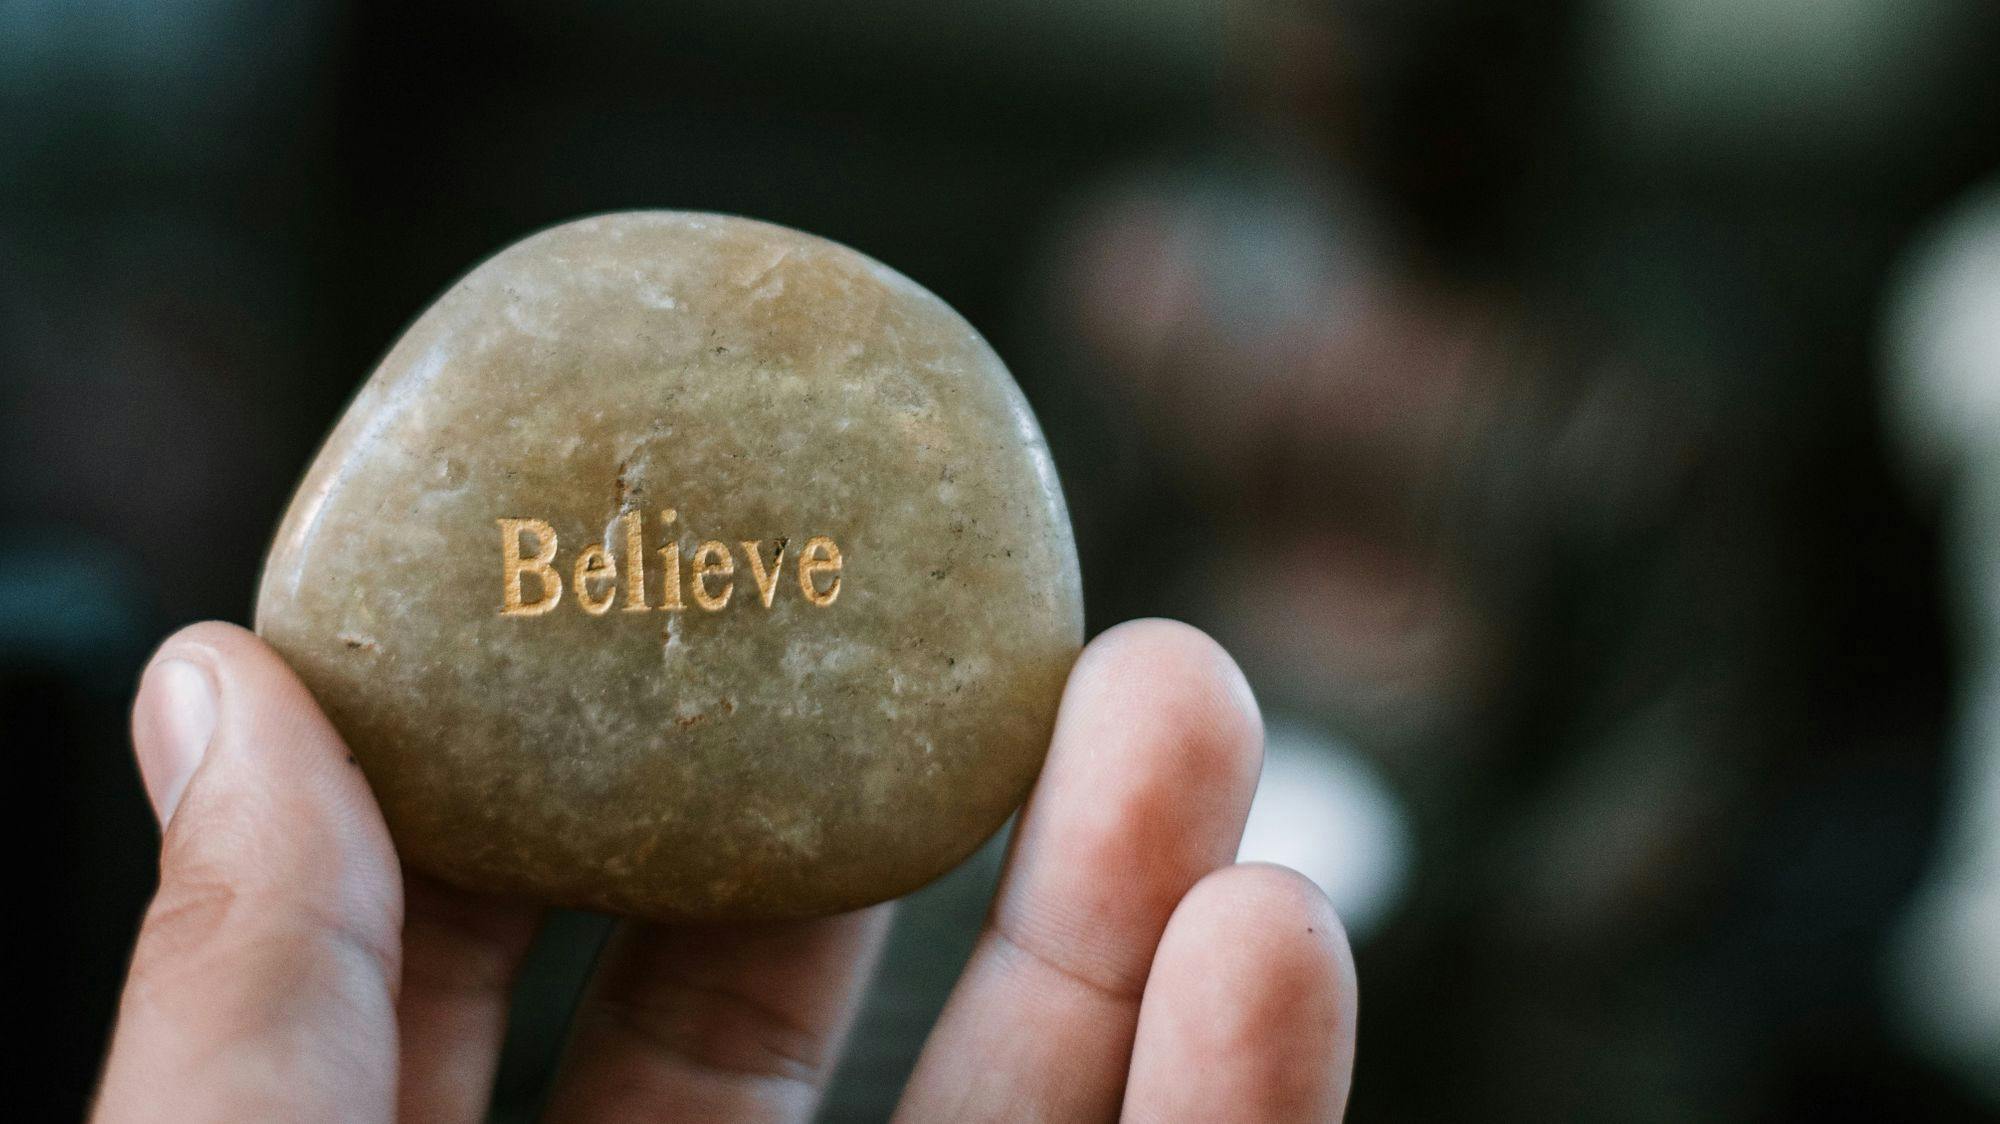 person holding brown stone with believe print photo – Free Human Image on Unsplash